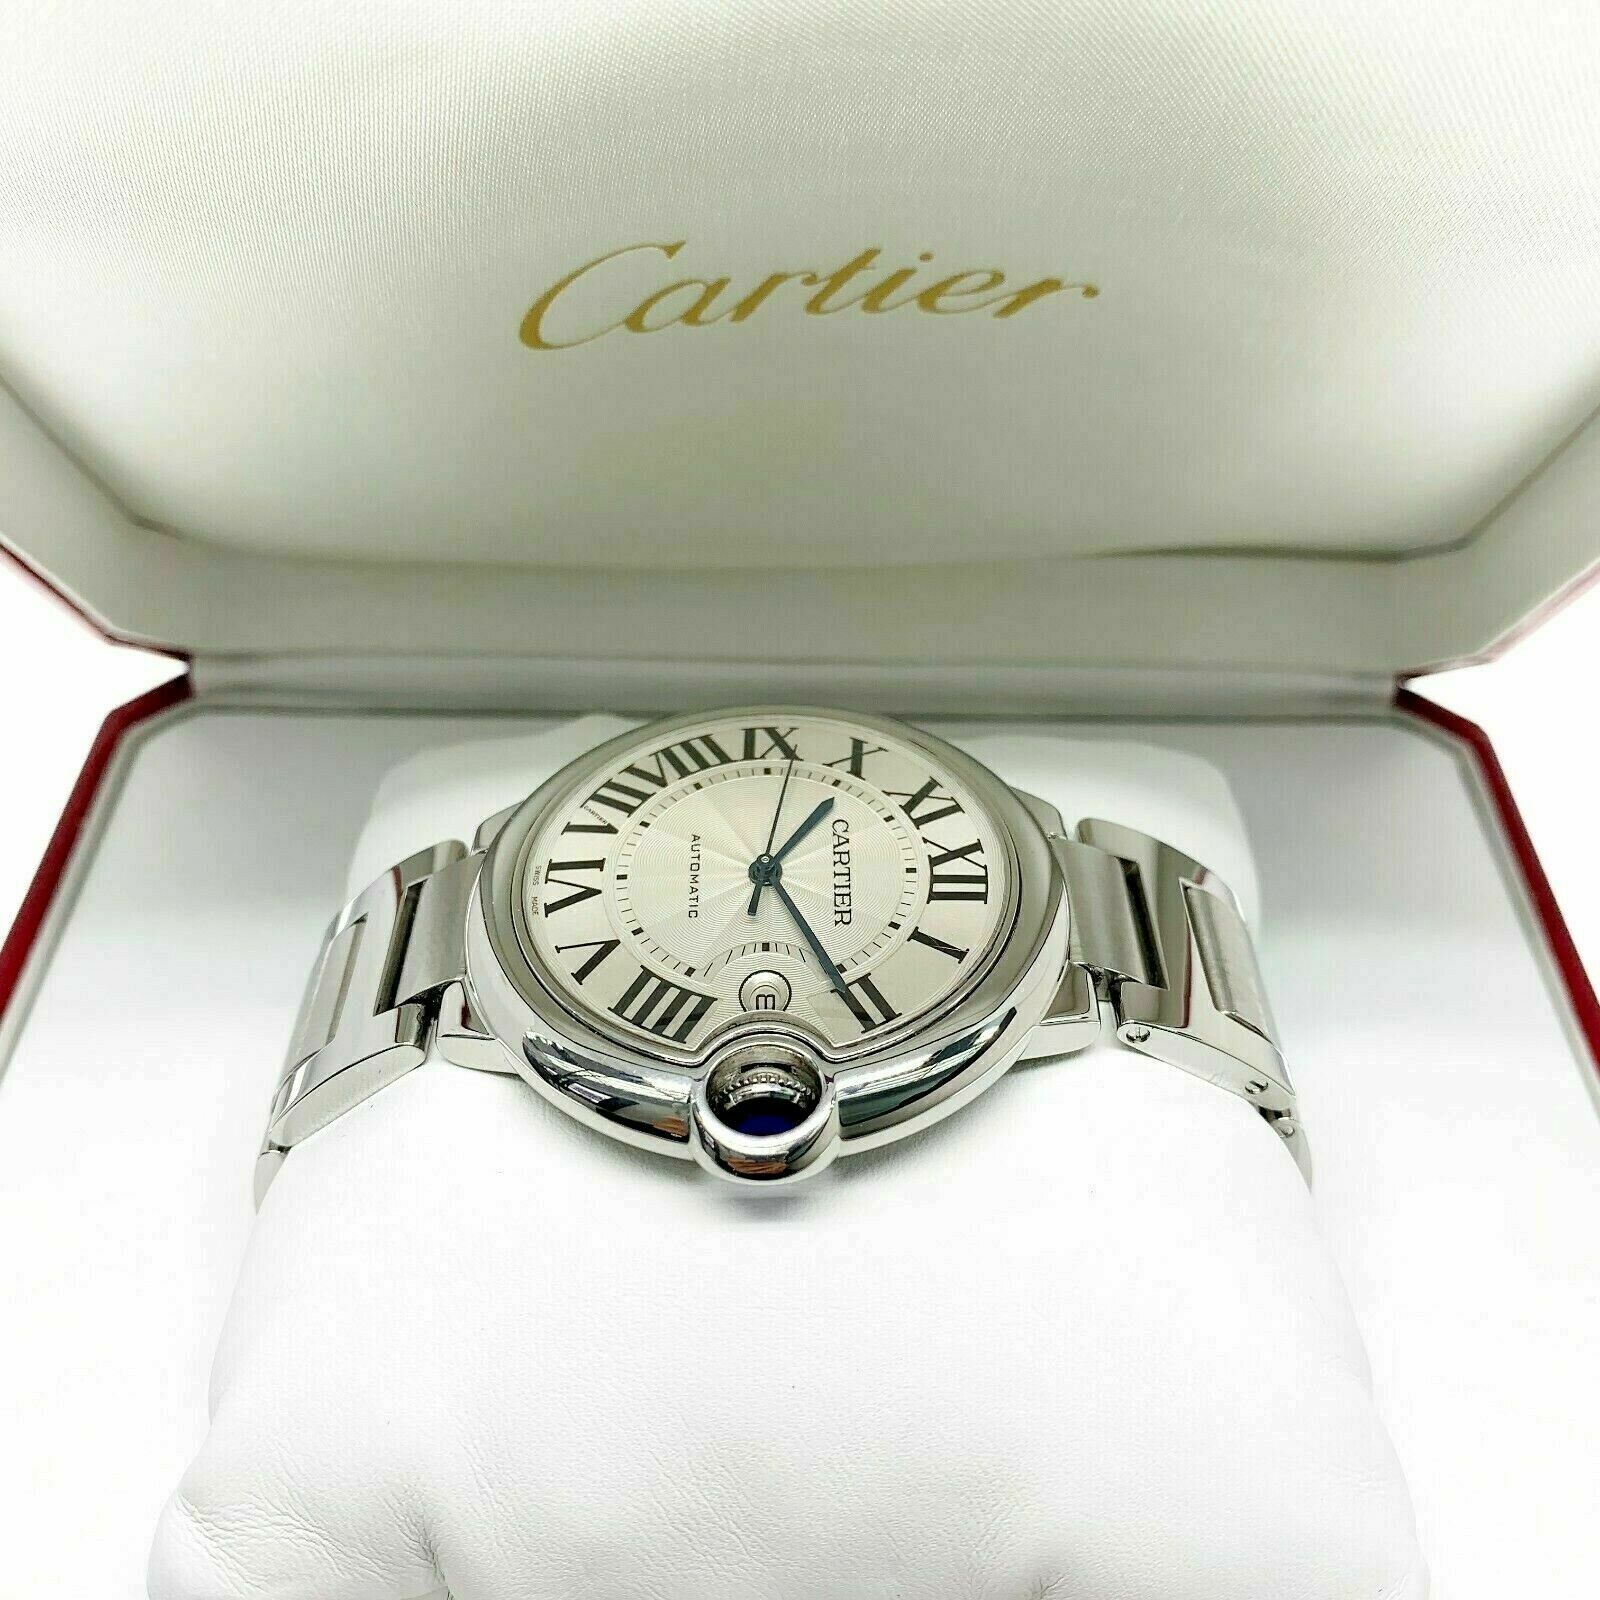 Cartier Ballon Bleu 42 MM Automatic Stainless Steel Watch Ref # 3001 with Box